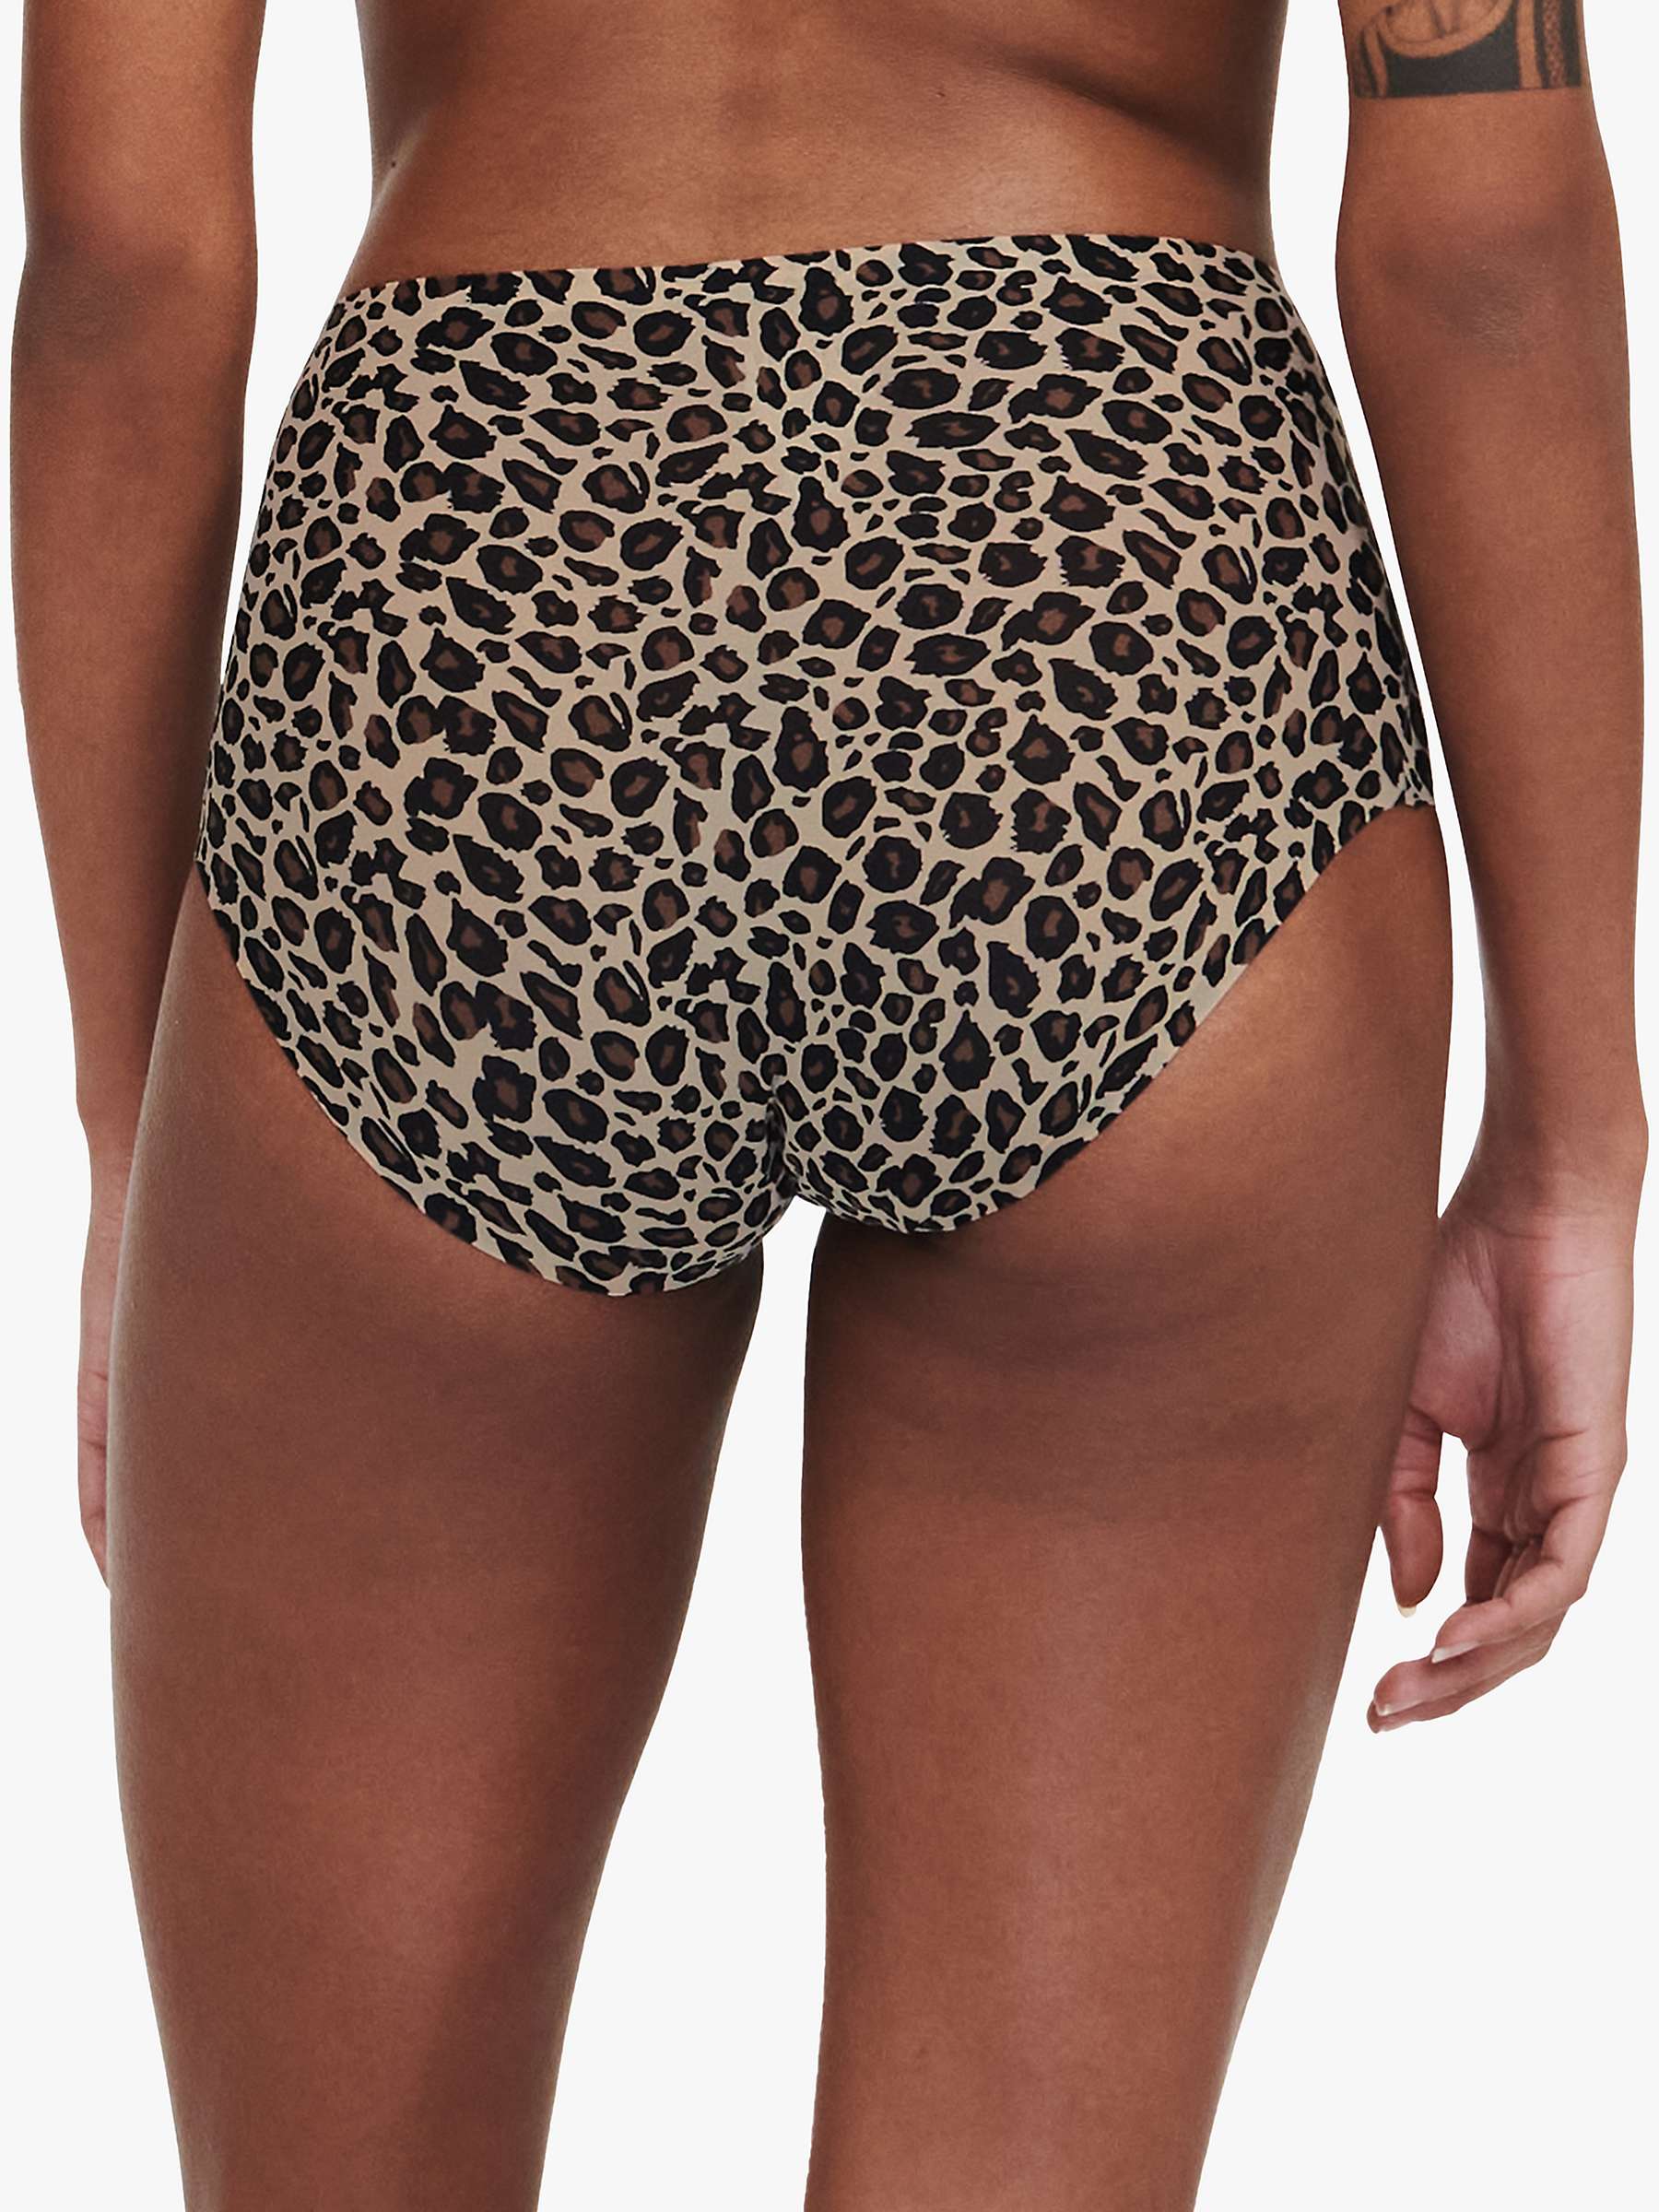 Buy Chantelle Soft Stretch High Waisted Briefs Online at johnlewis.com